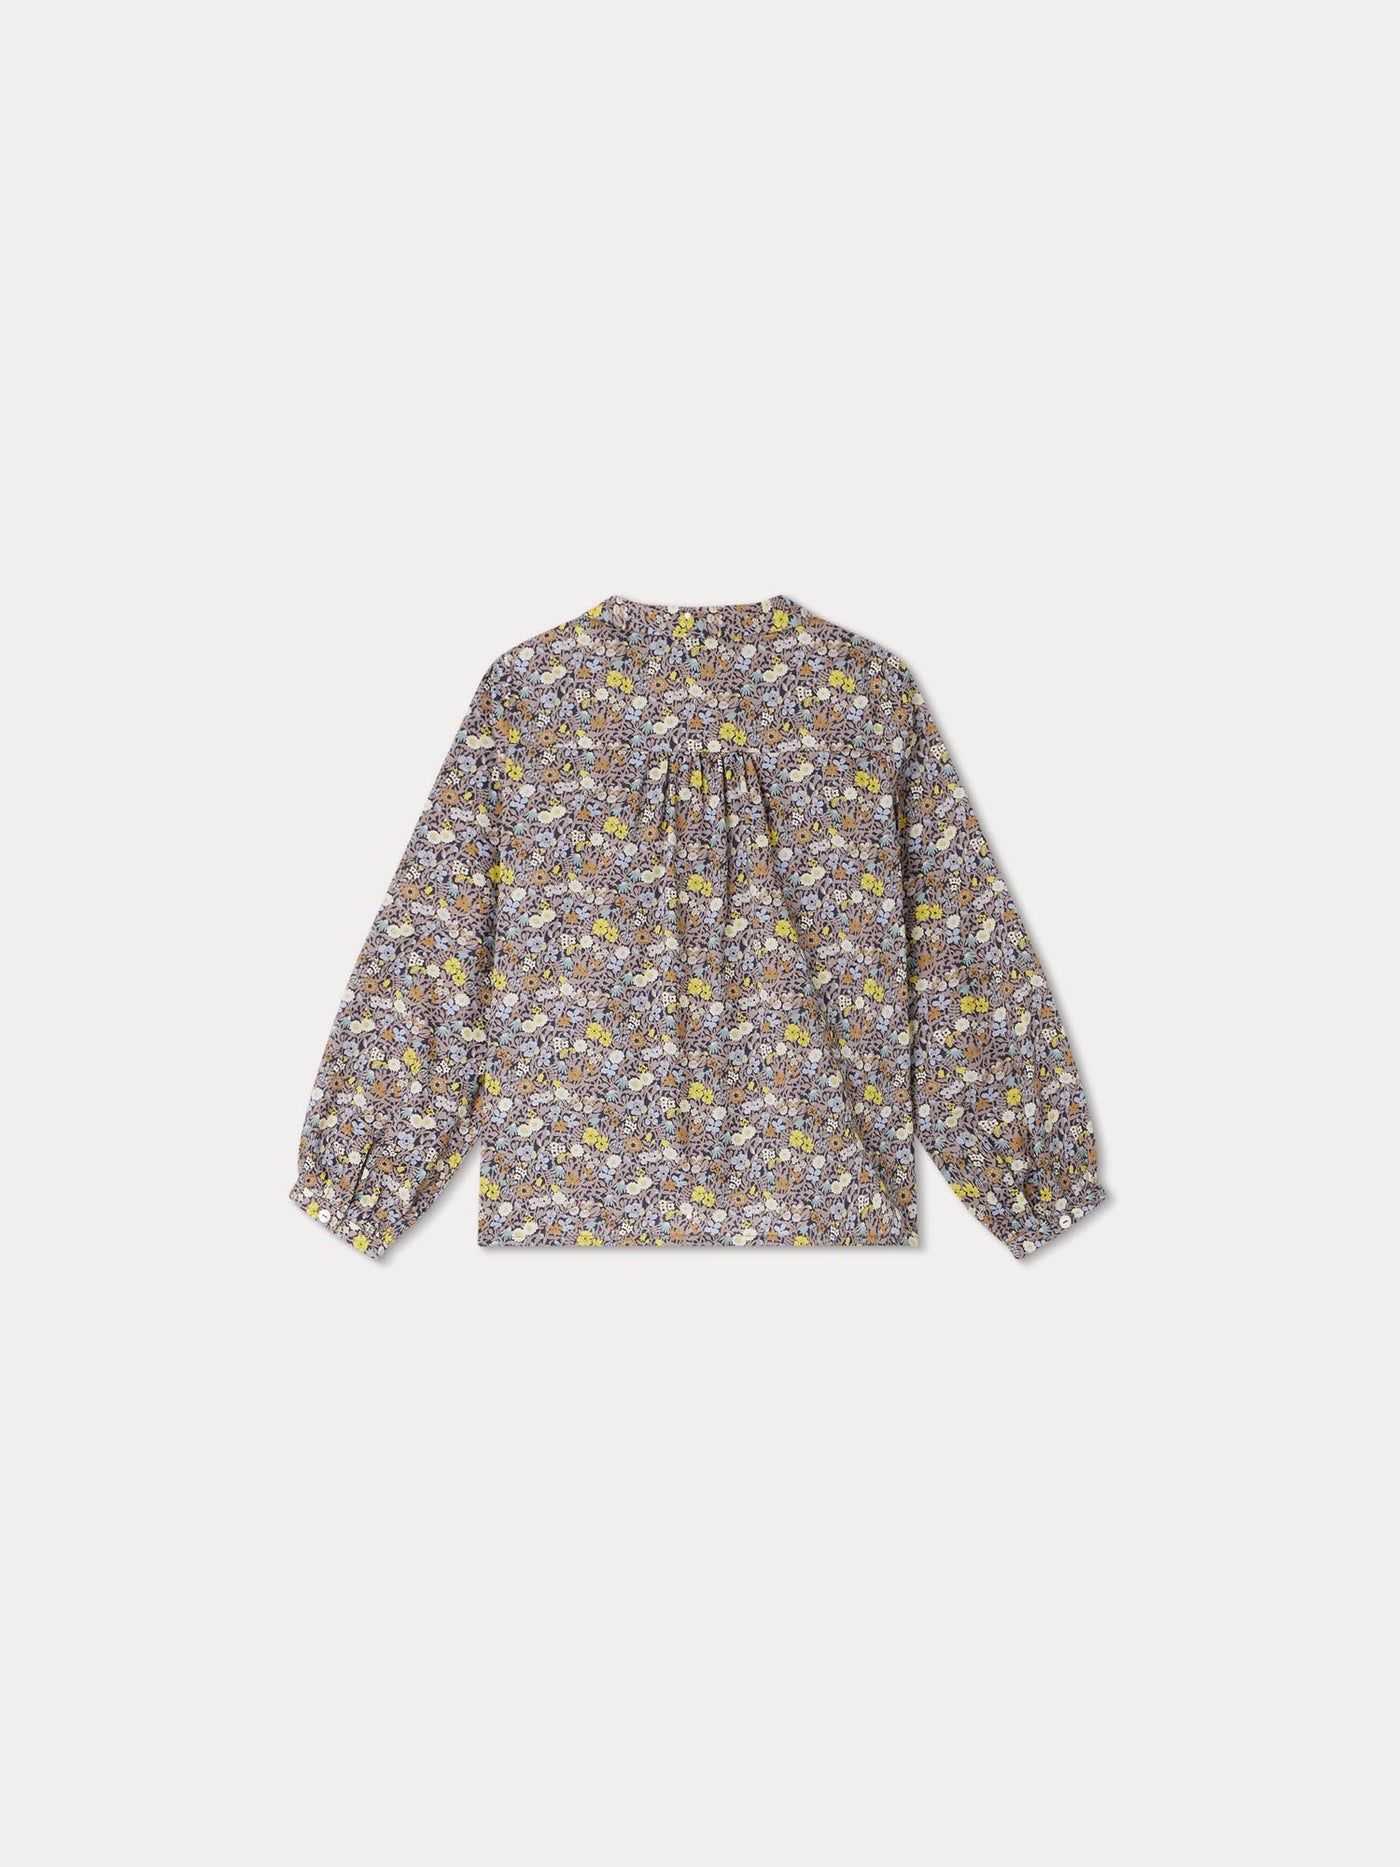 Gwenaelle blouse in Liberty fabric